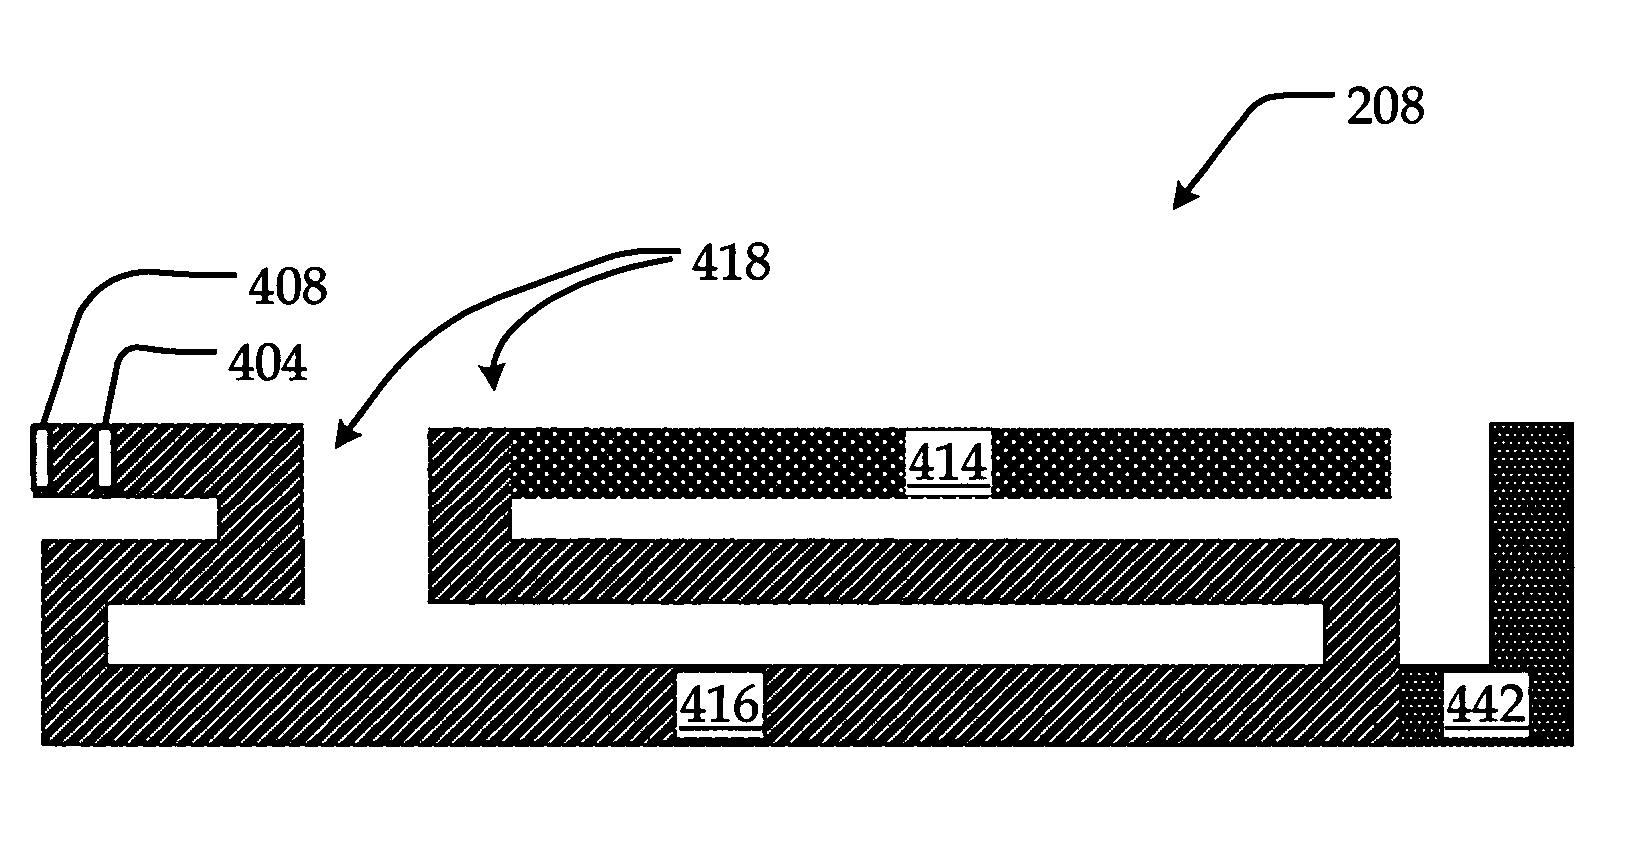 Planar inverted "F" antenna and method of tuning same